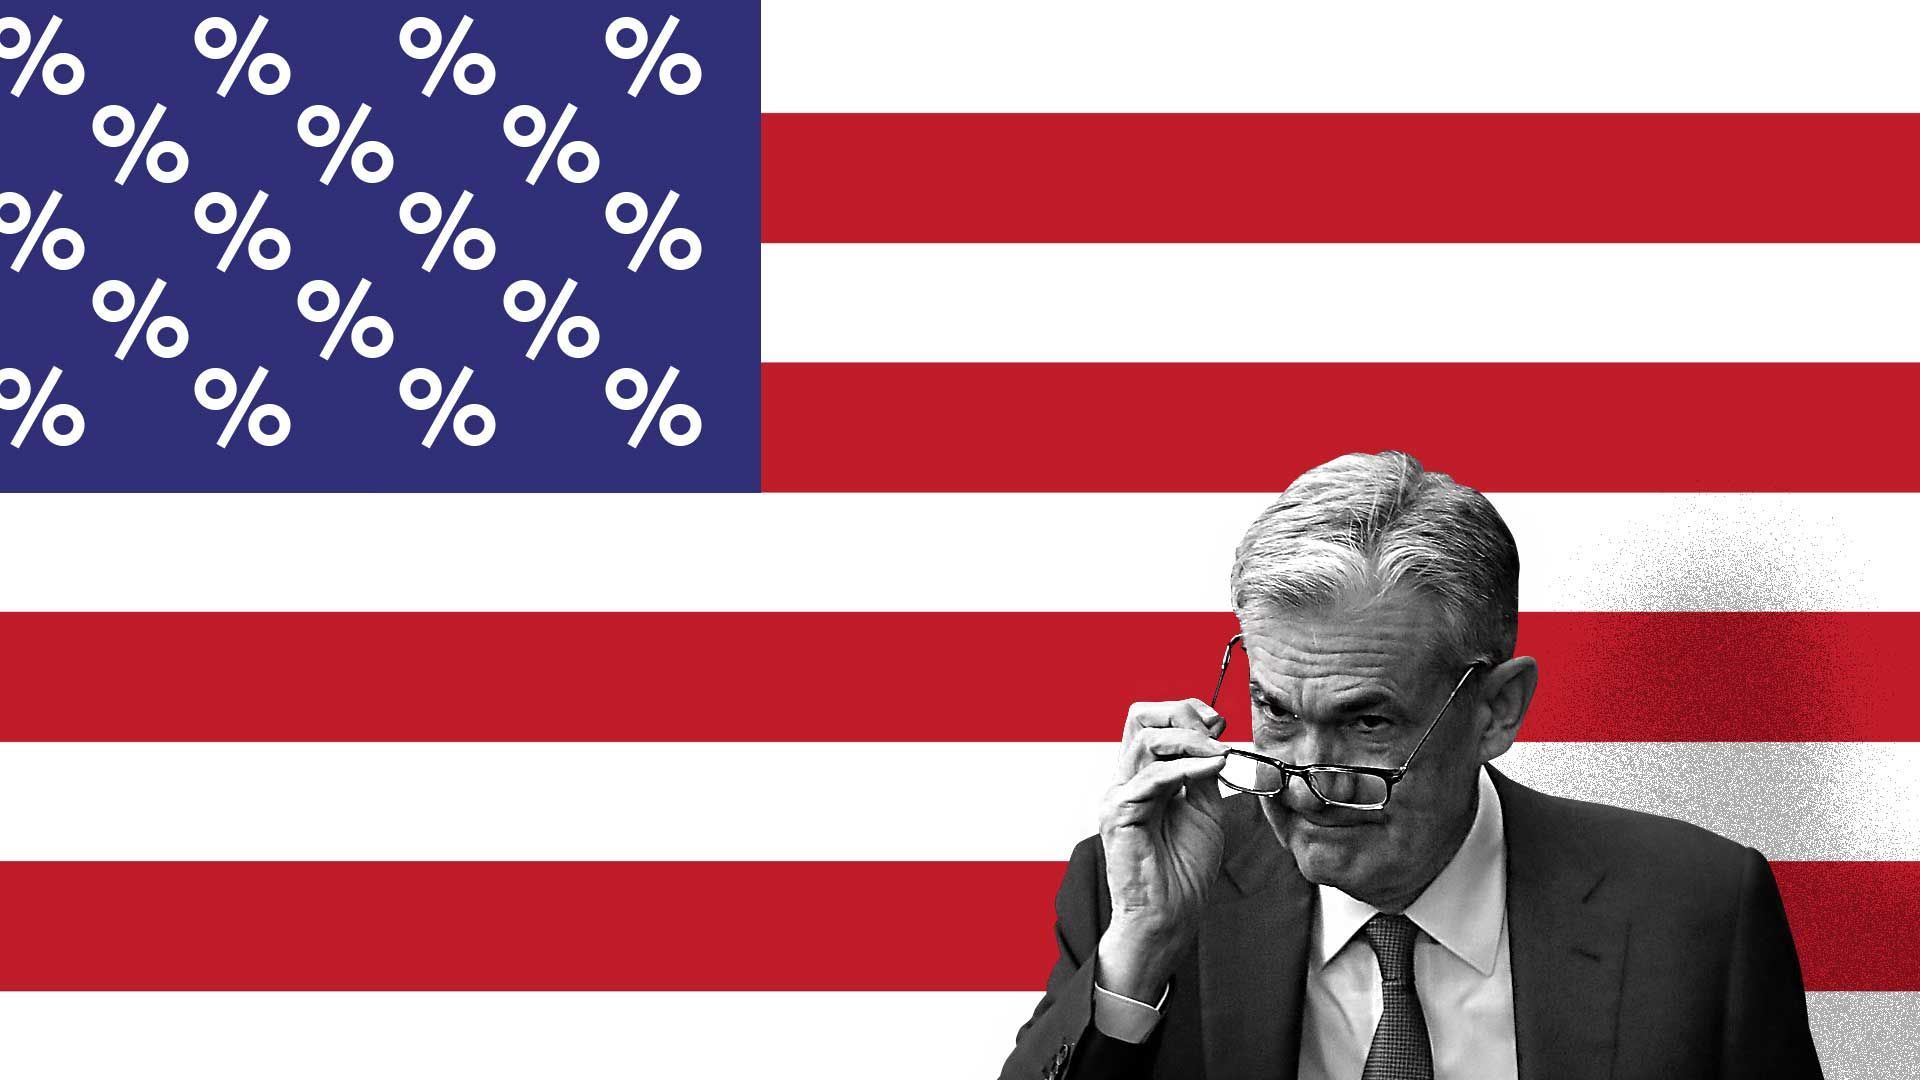 Jay Powell standing in front of a U.S. flag with the stars replaced by percent signs